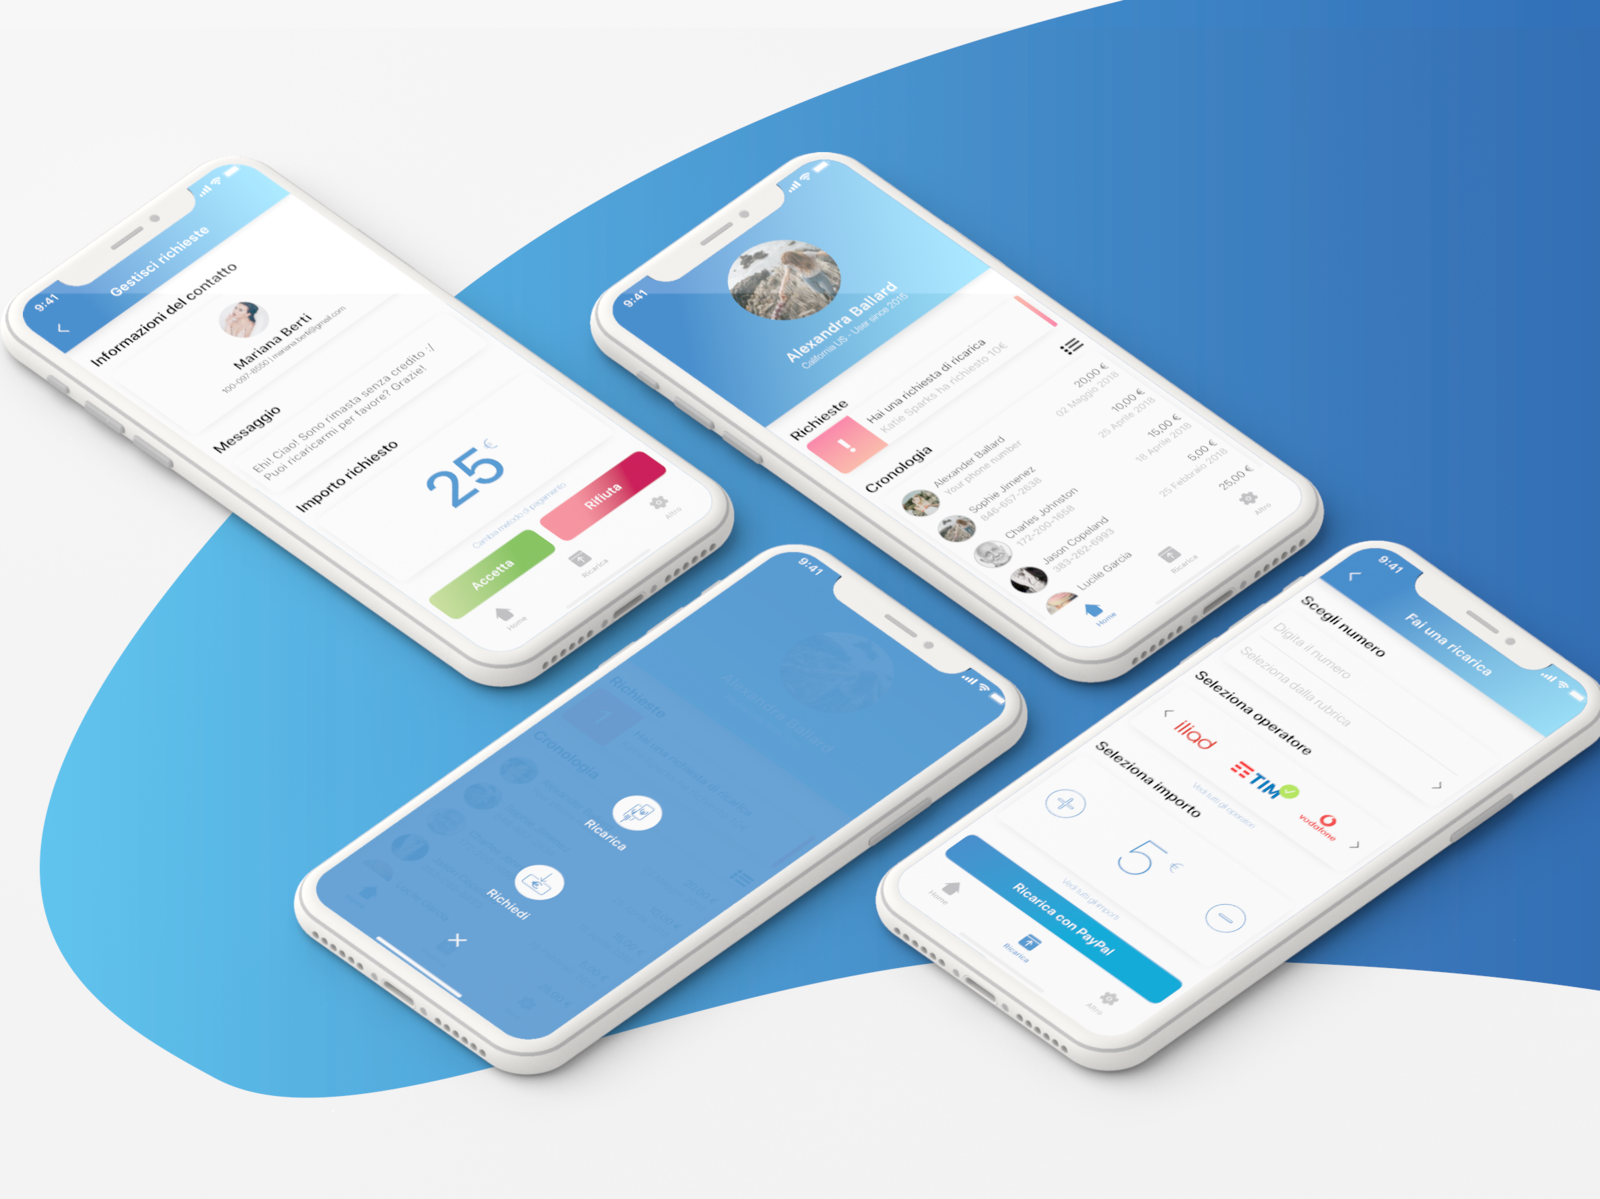 Restyling app PayPal Carica UI / UX by Oreste Prisco on Dribbble